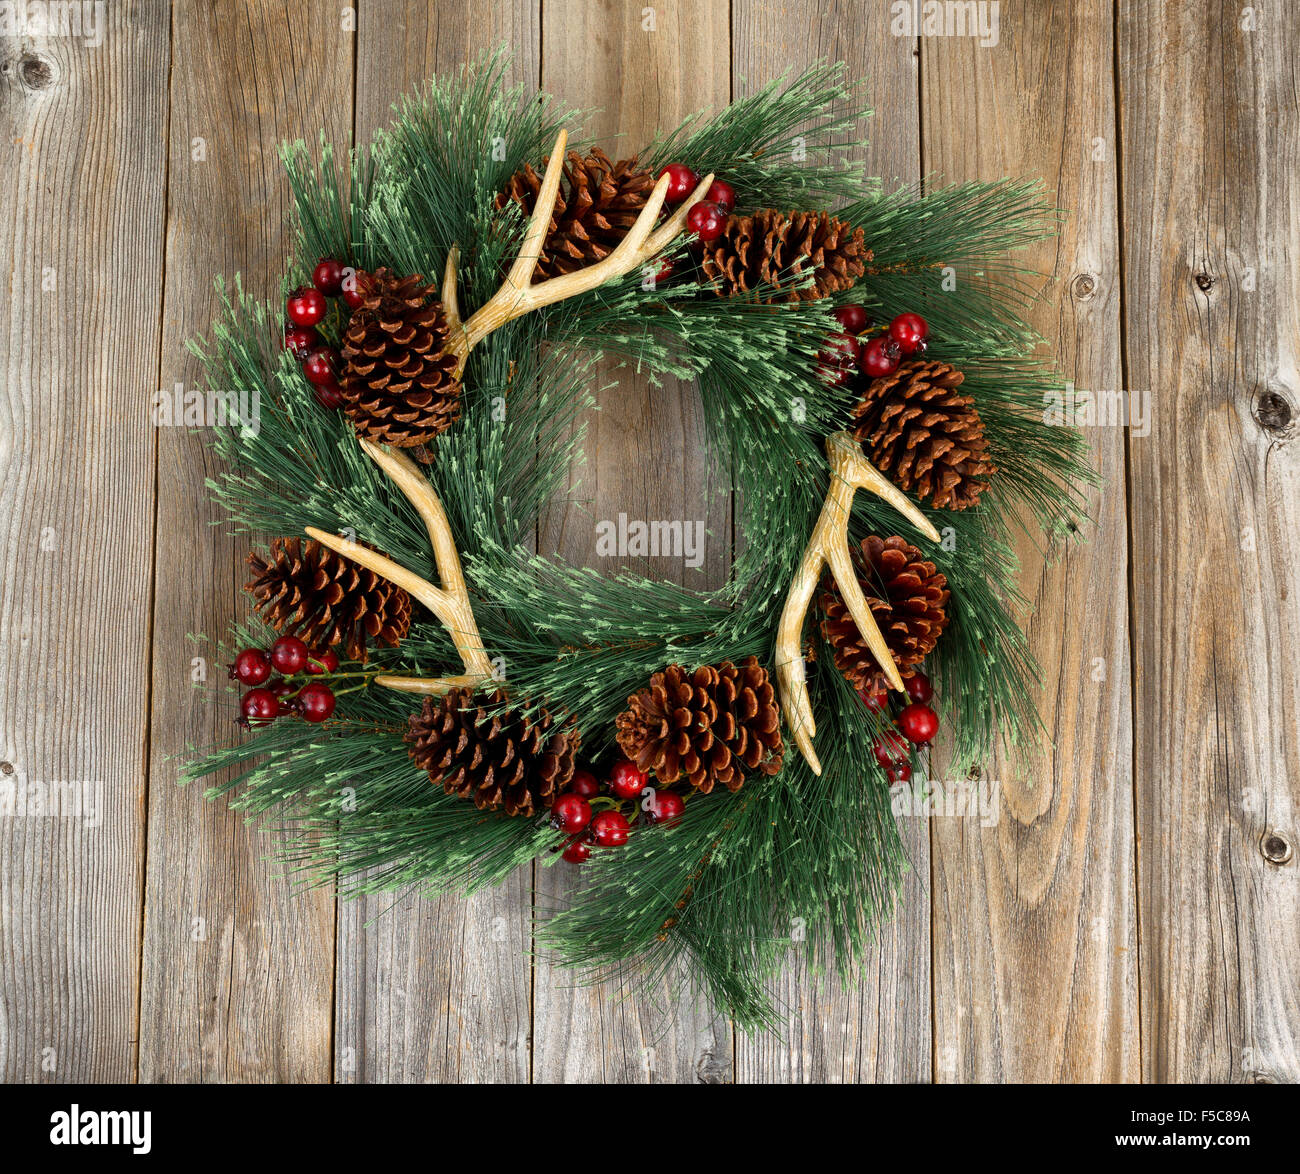 Western style wreath with antlers, pine cones and berries on rustic wood. Boards in vertical layout. Stock Photo